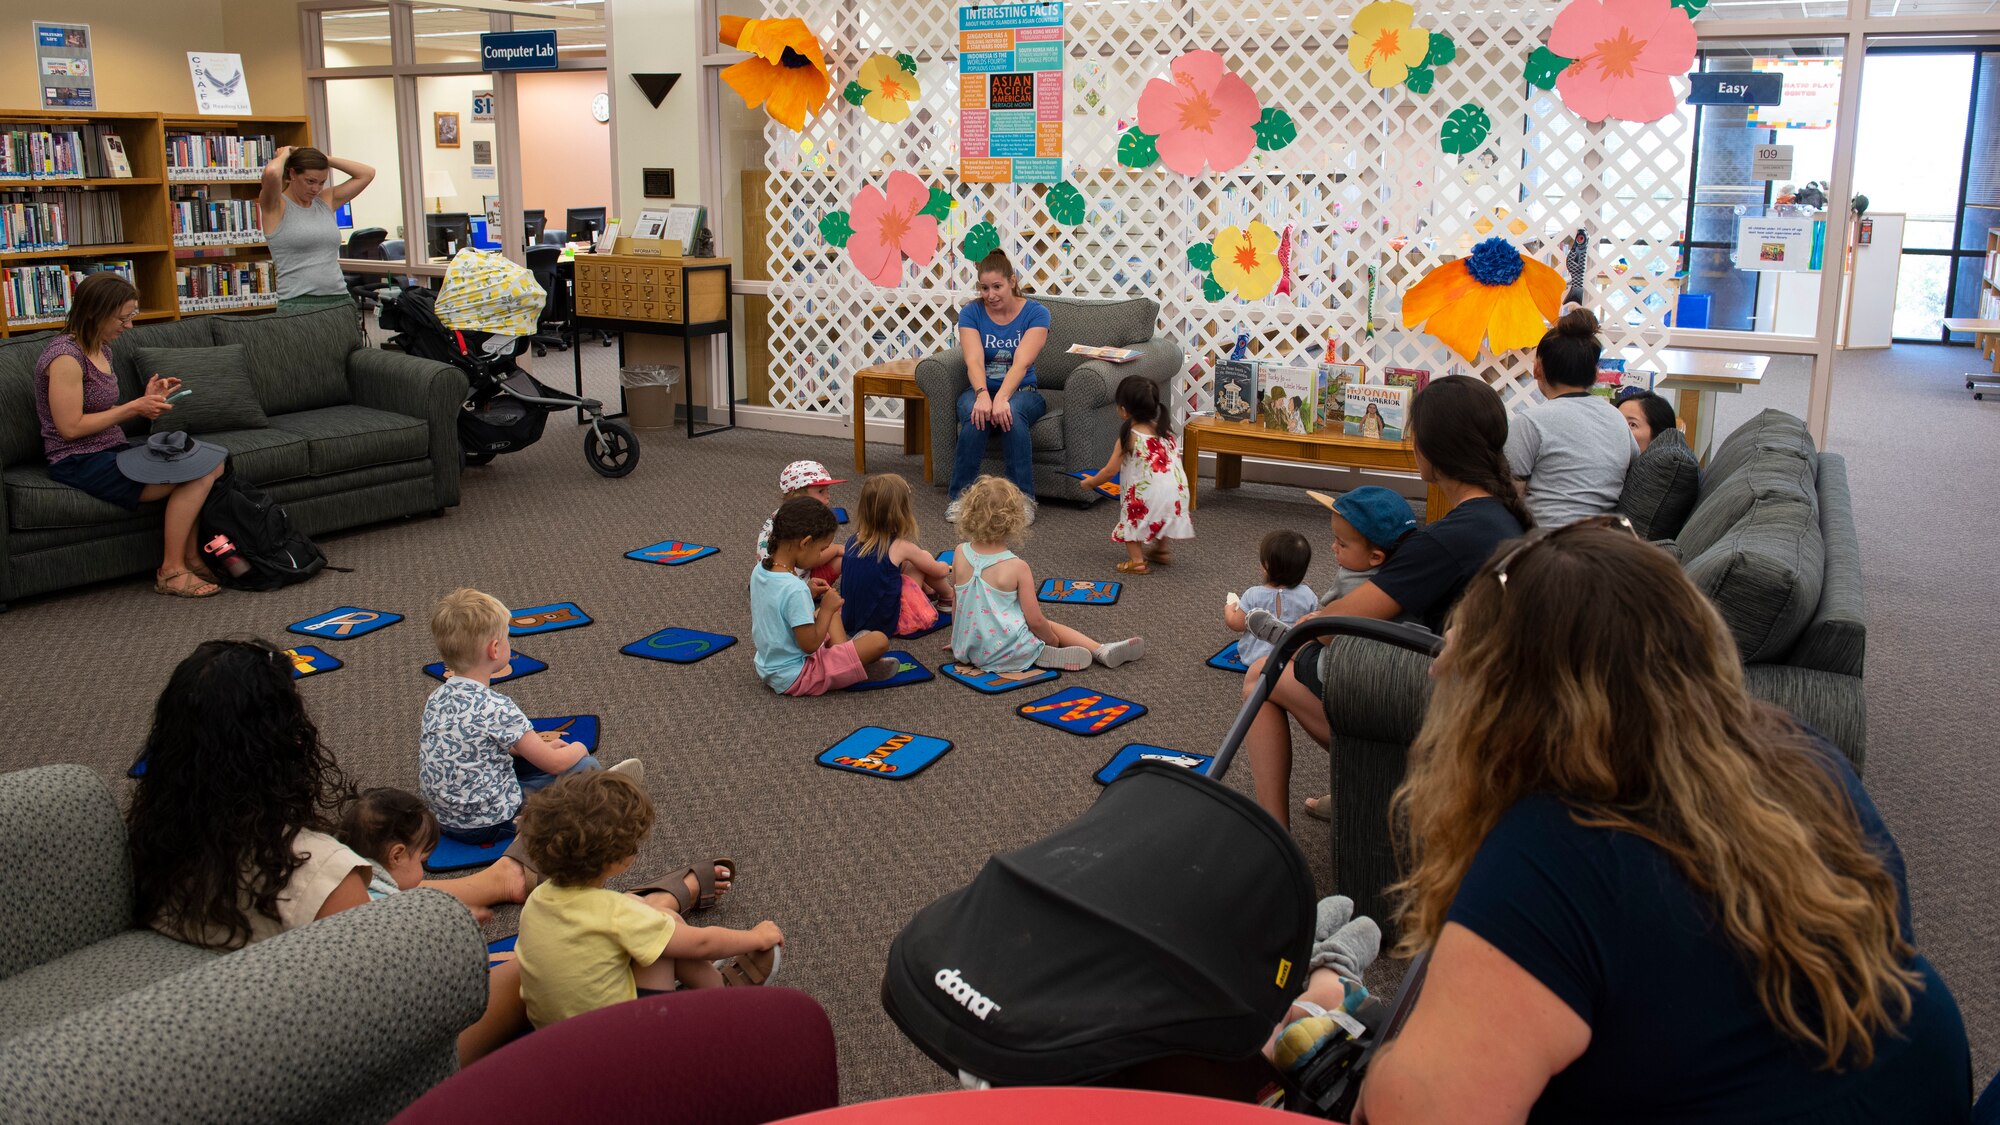 Children gather around for storytime, May 11, 2022, on Holloman Air Force Base, New Mexico.